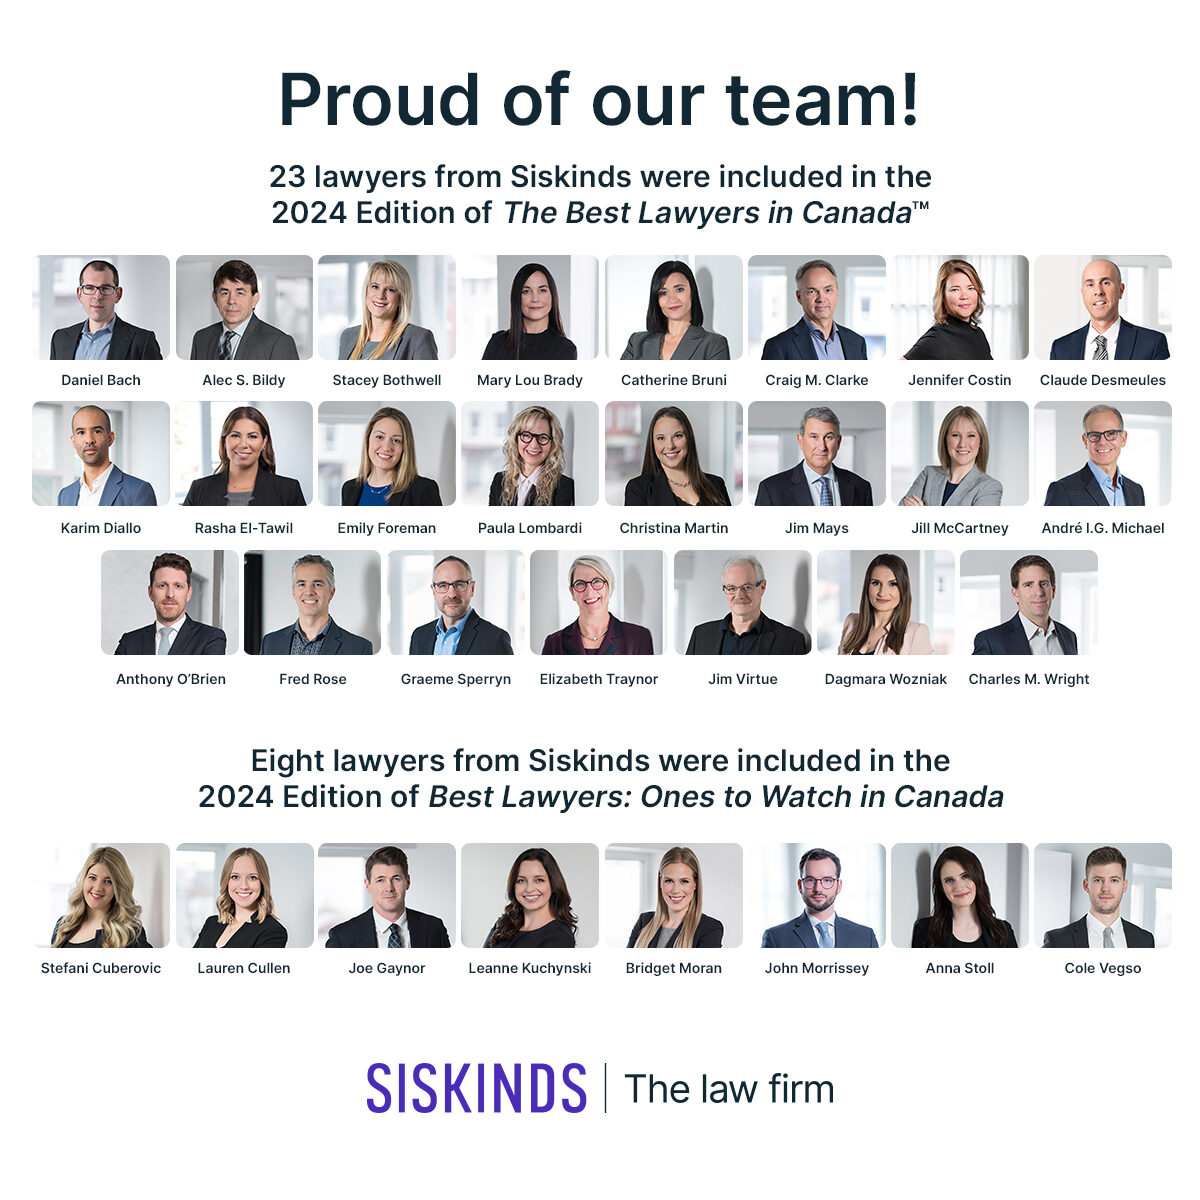 Photo showing multiple profile headshots of the 23 lawyers from Siskinds that were included in the 2024 Edition of The Best Lawyers in Canada and profile headshots of the 8 lawyers from Siskinds that were included in the 2024 Edition of Best Lawyers: Ones to Watch in Canada.